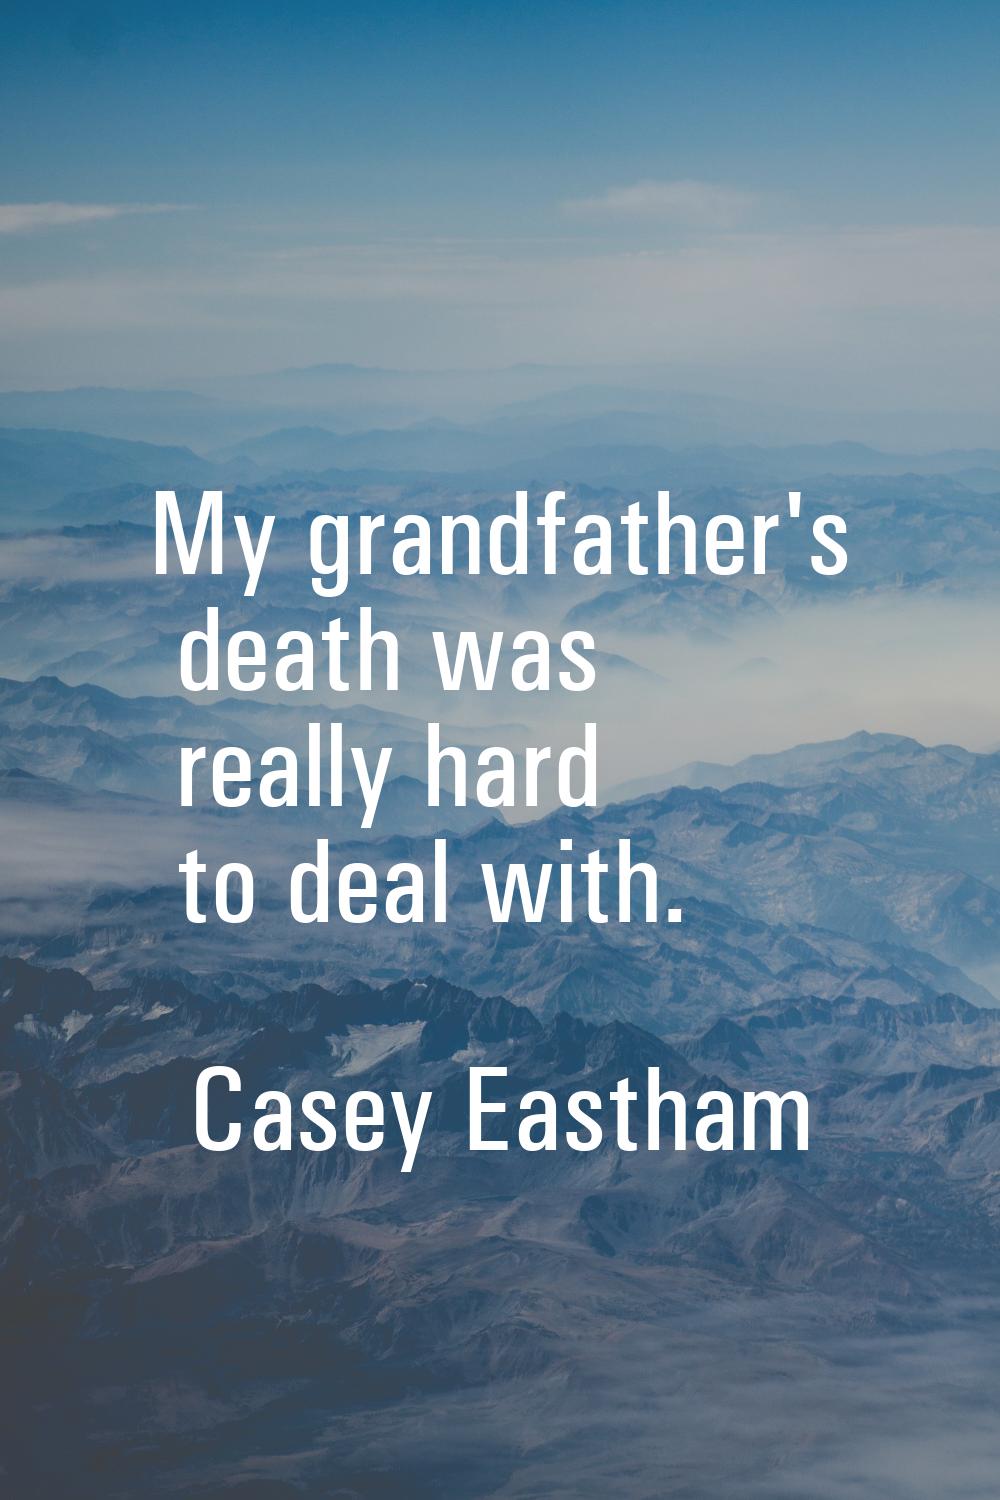 My grandfather's death was really hard to deal with.